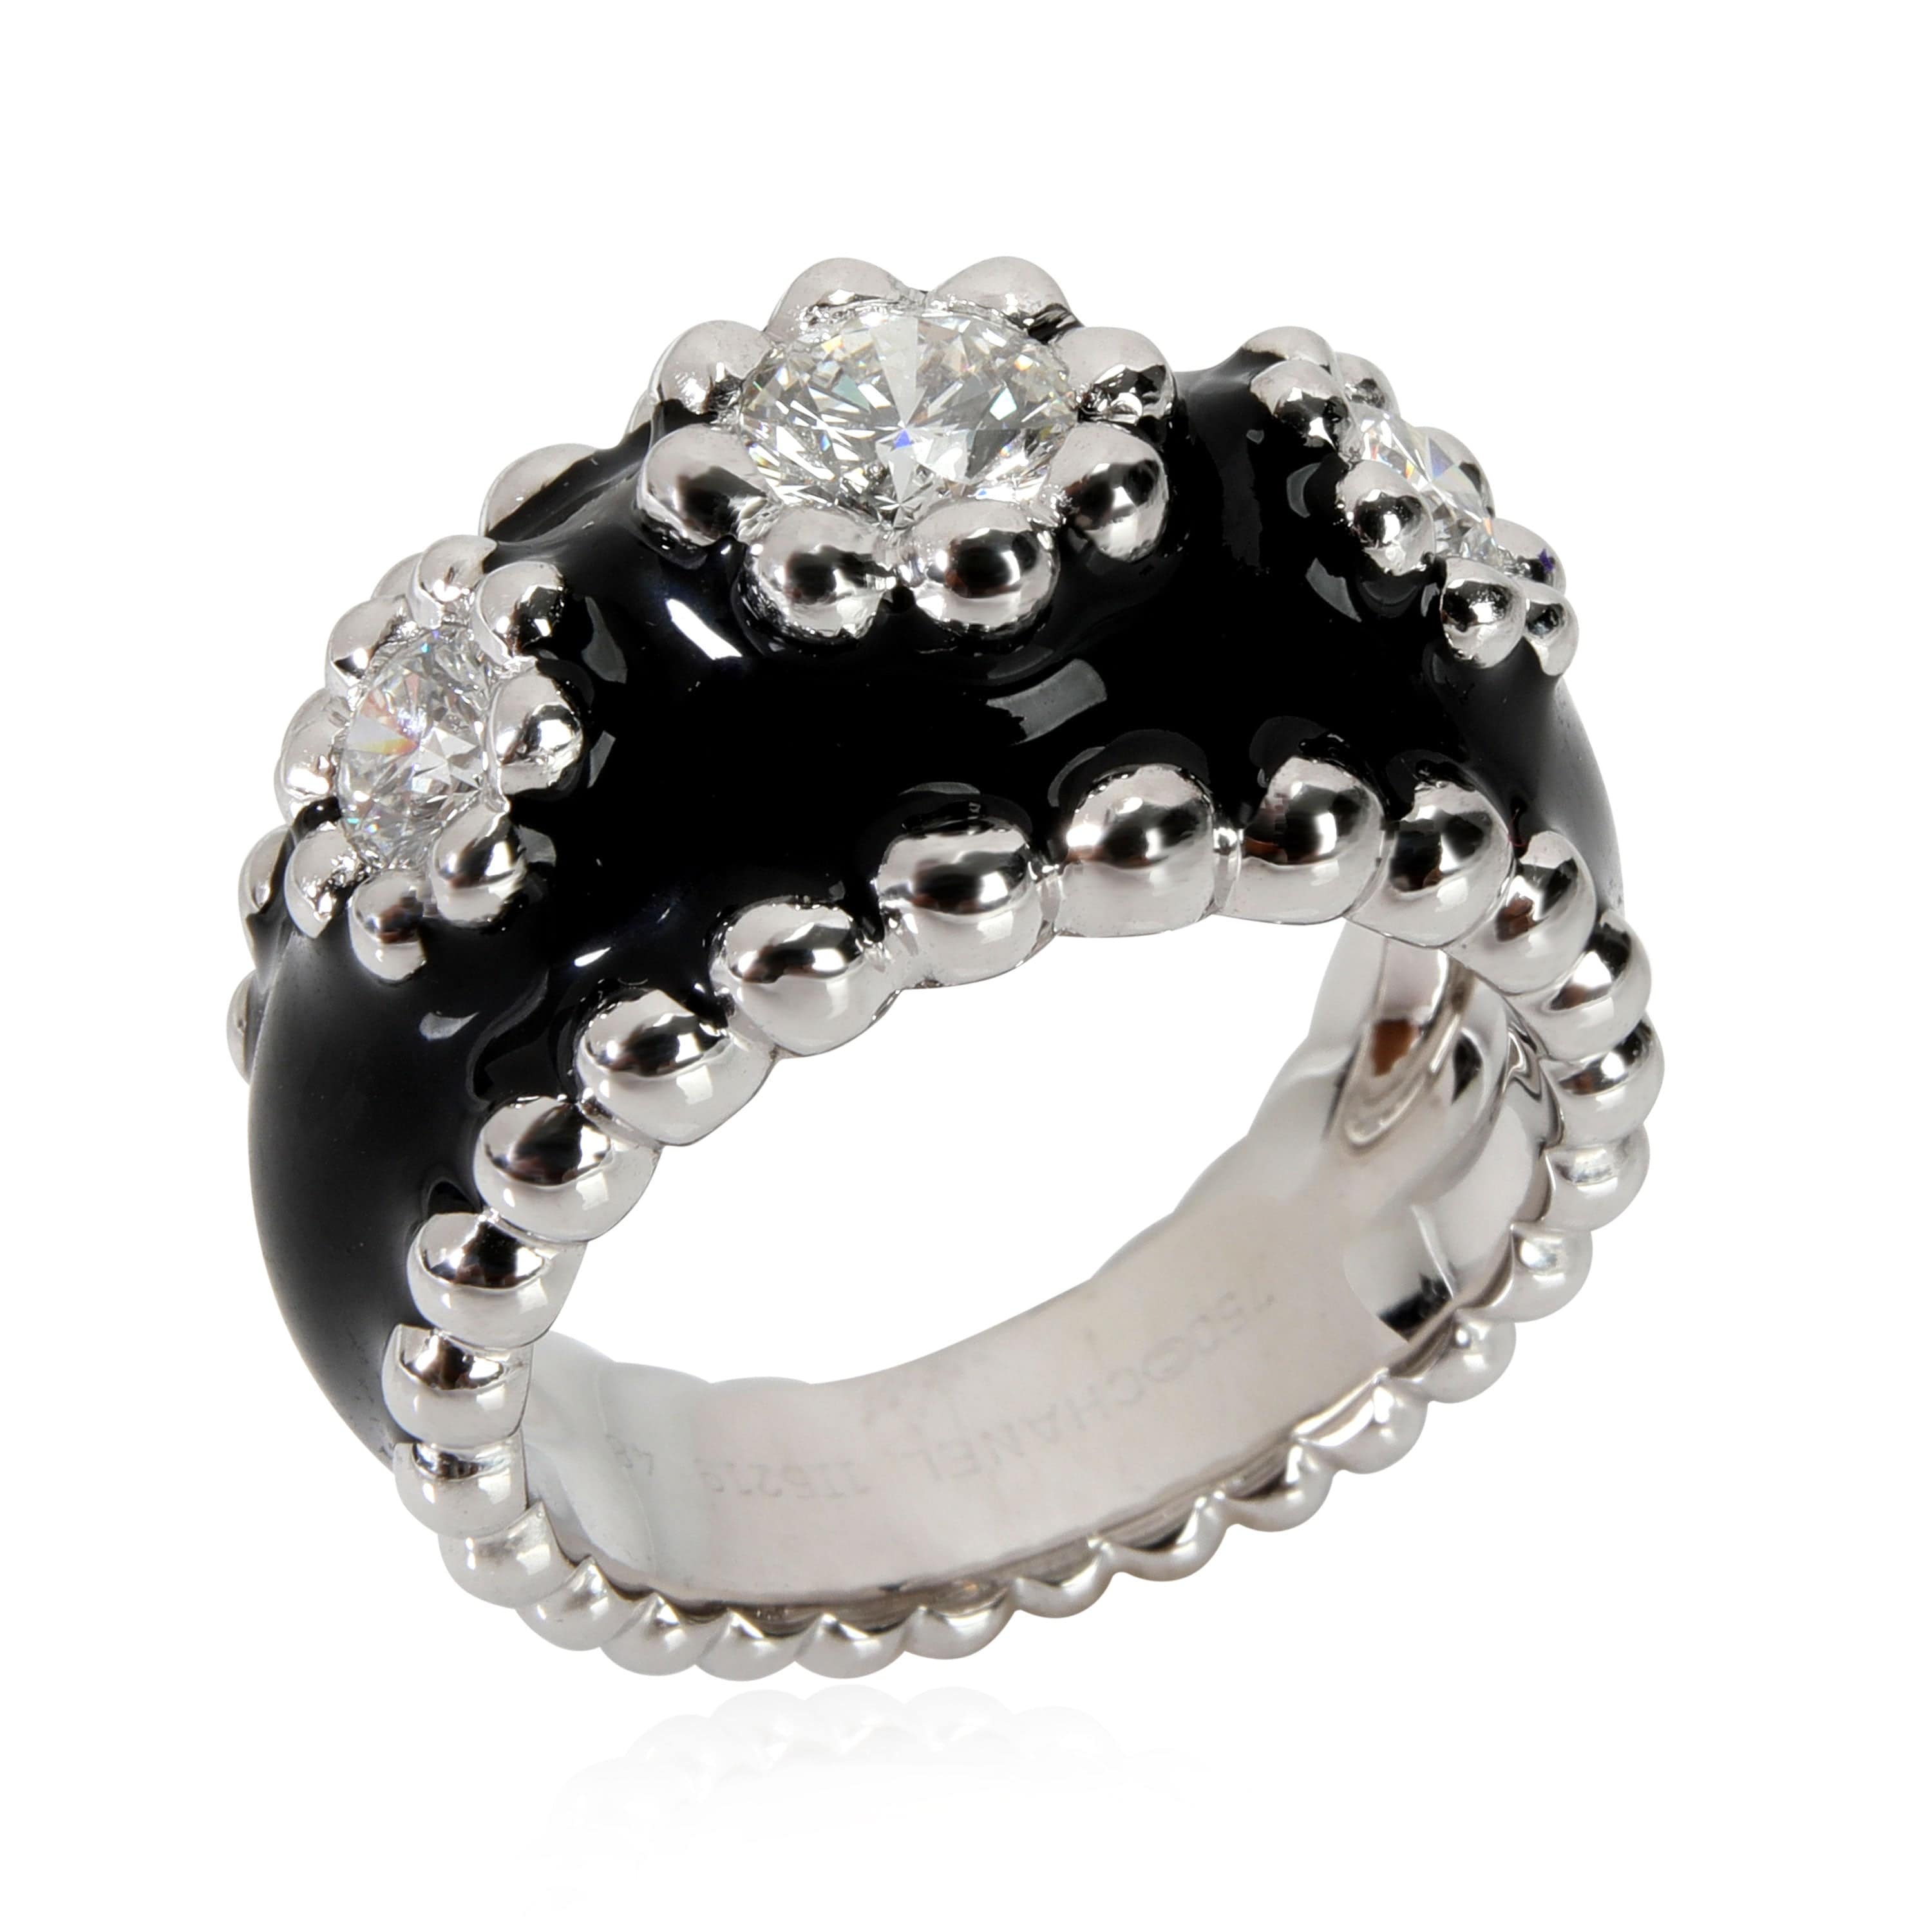 Chanel Vintage Chanel Diamond & Enamel Cocktail Ring in 18kt White Gold 0.9 CTW